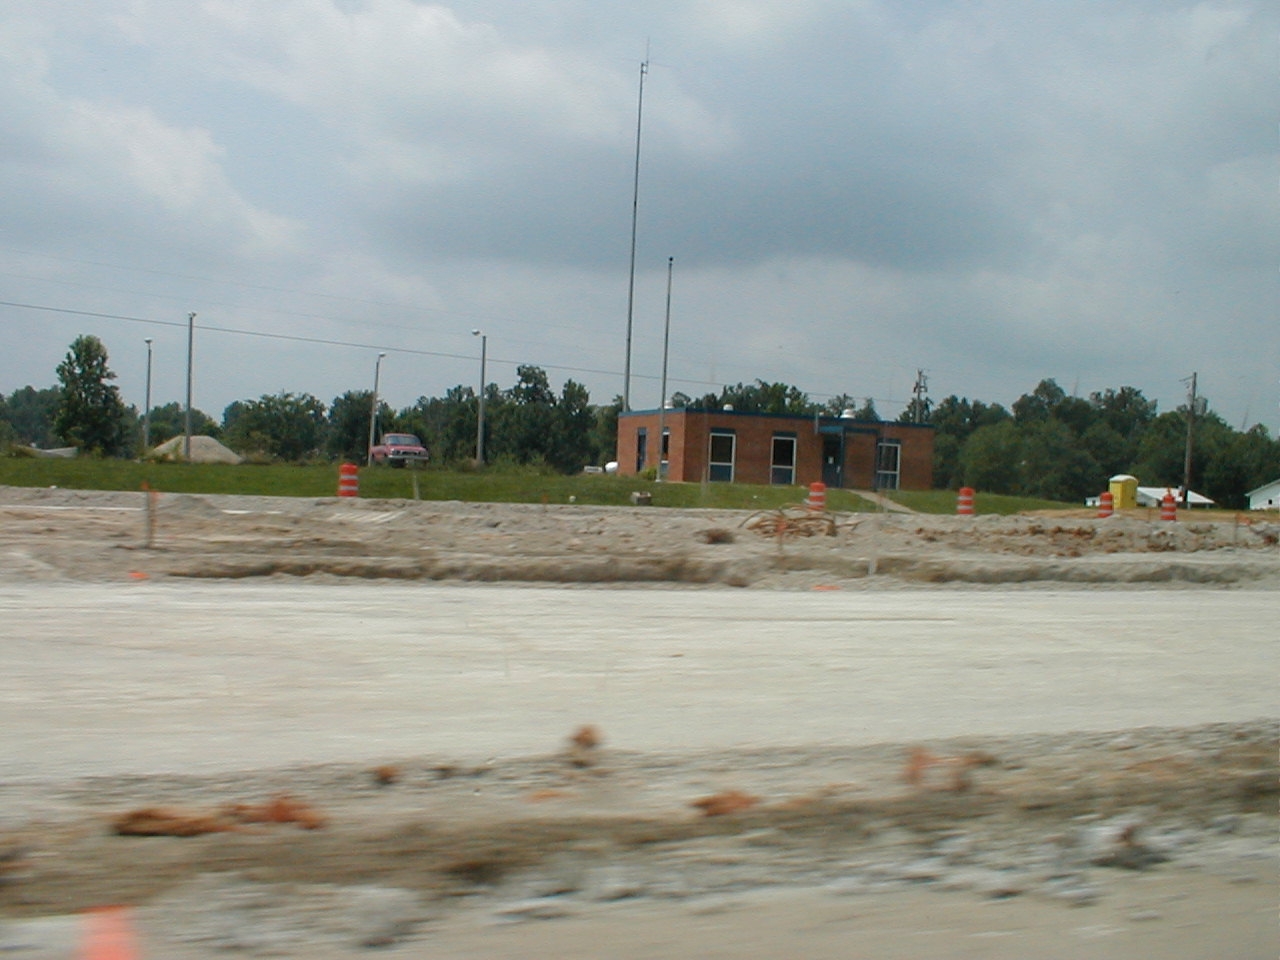 Construction work to remove the western toll booth. The toll booth office is visible.